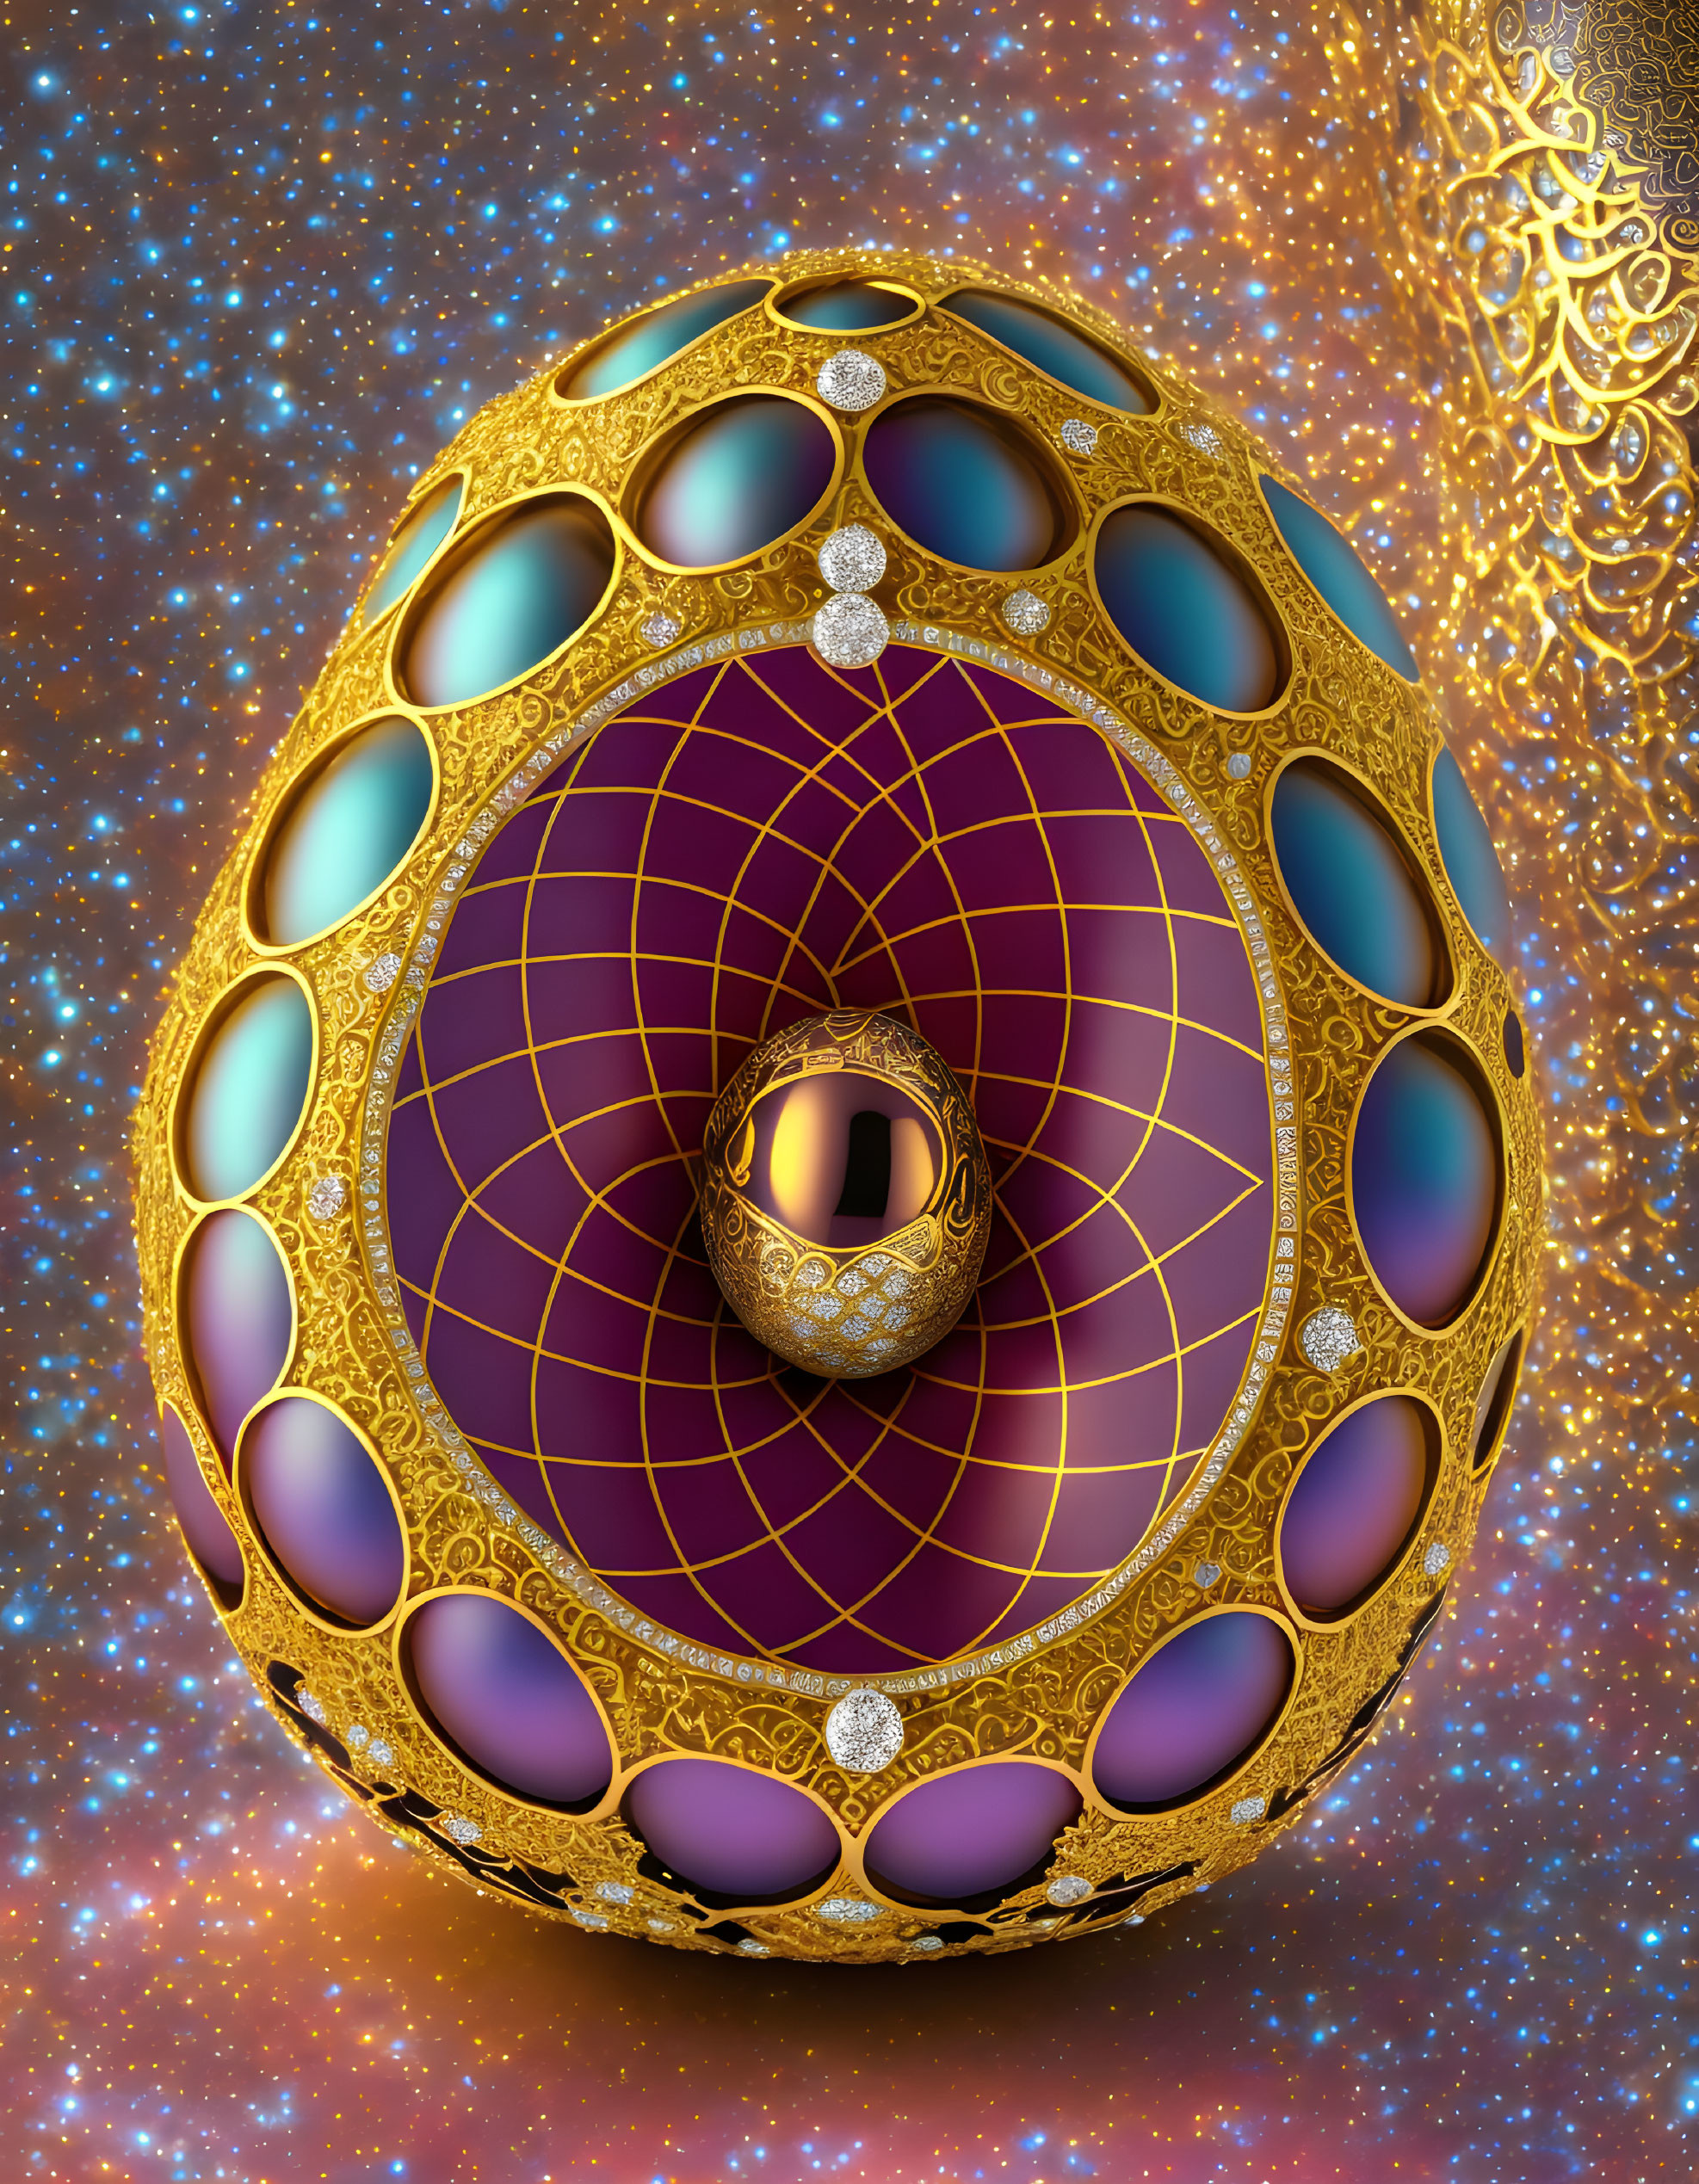 Intricate 3D rendered ornate egg with golden patterns and jewel-toned details